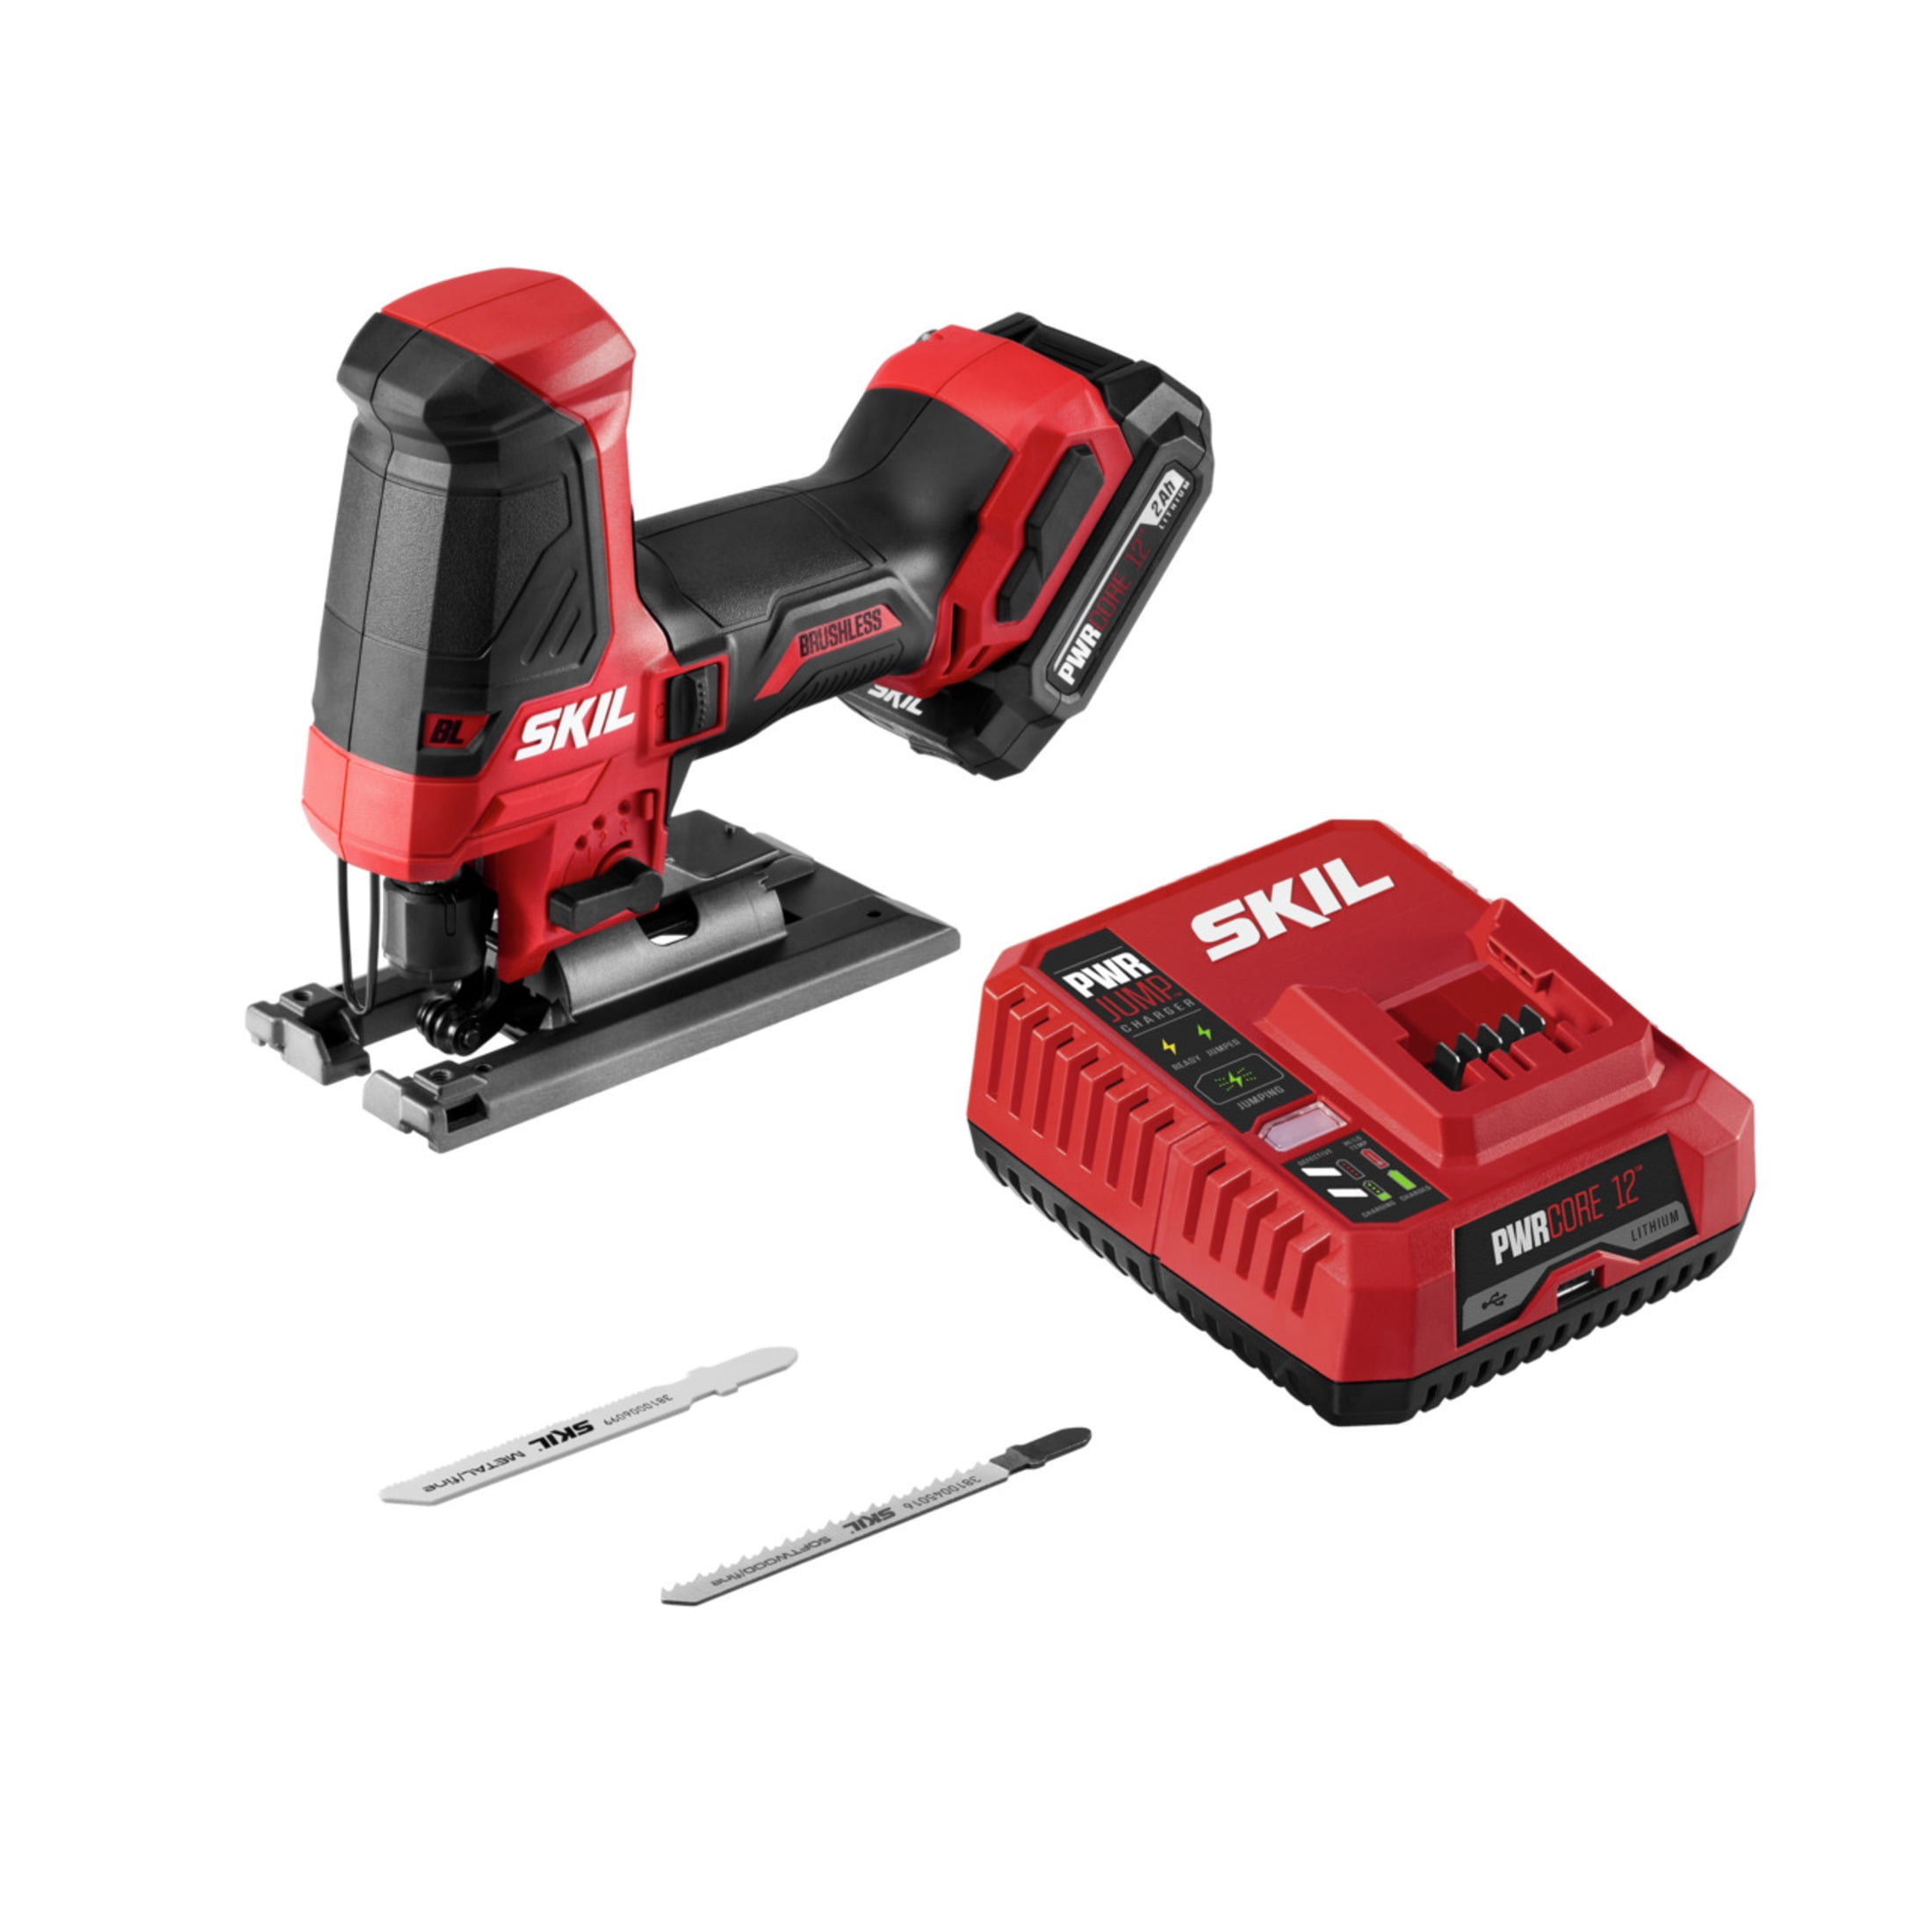 Jigsaw Tacklife 20v 2.0ah Max Cordless Jig Saw With Battery & Charger 6 Blades for sale online 